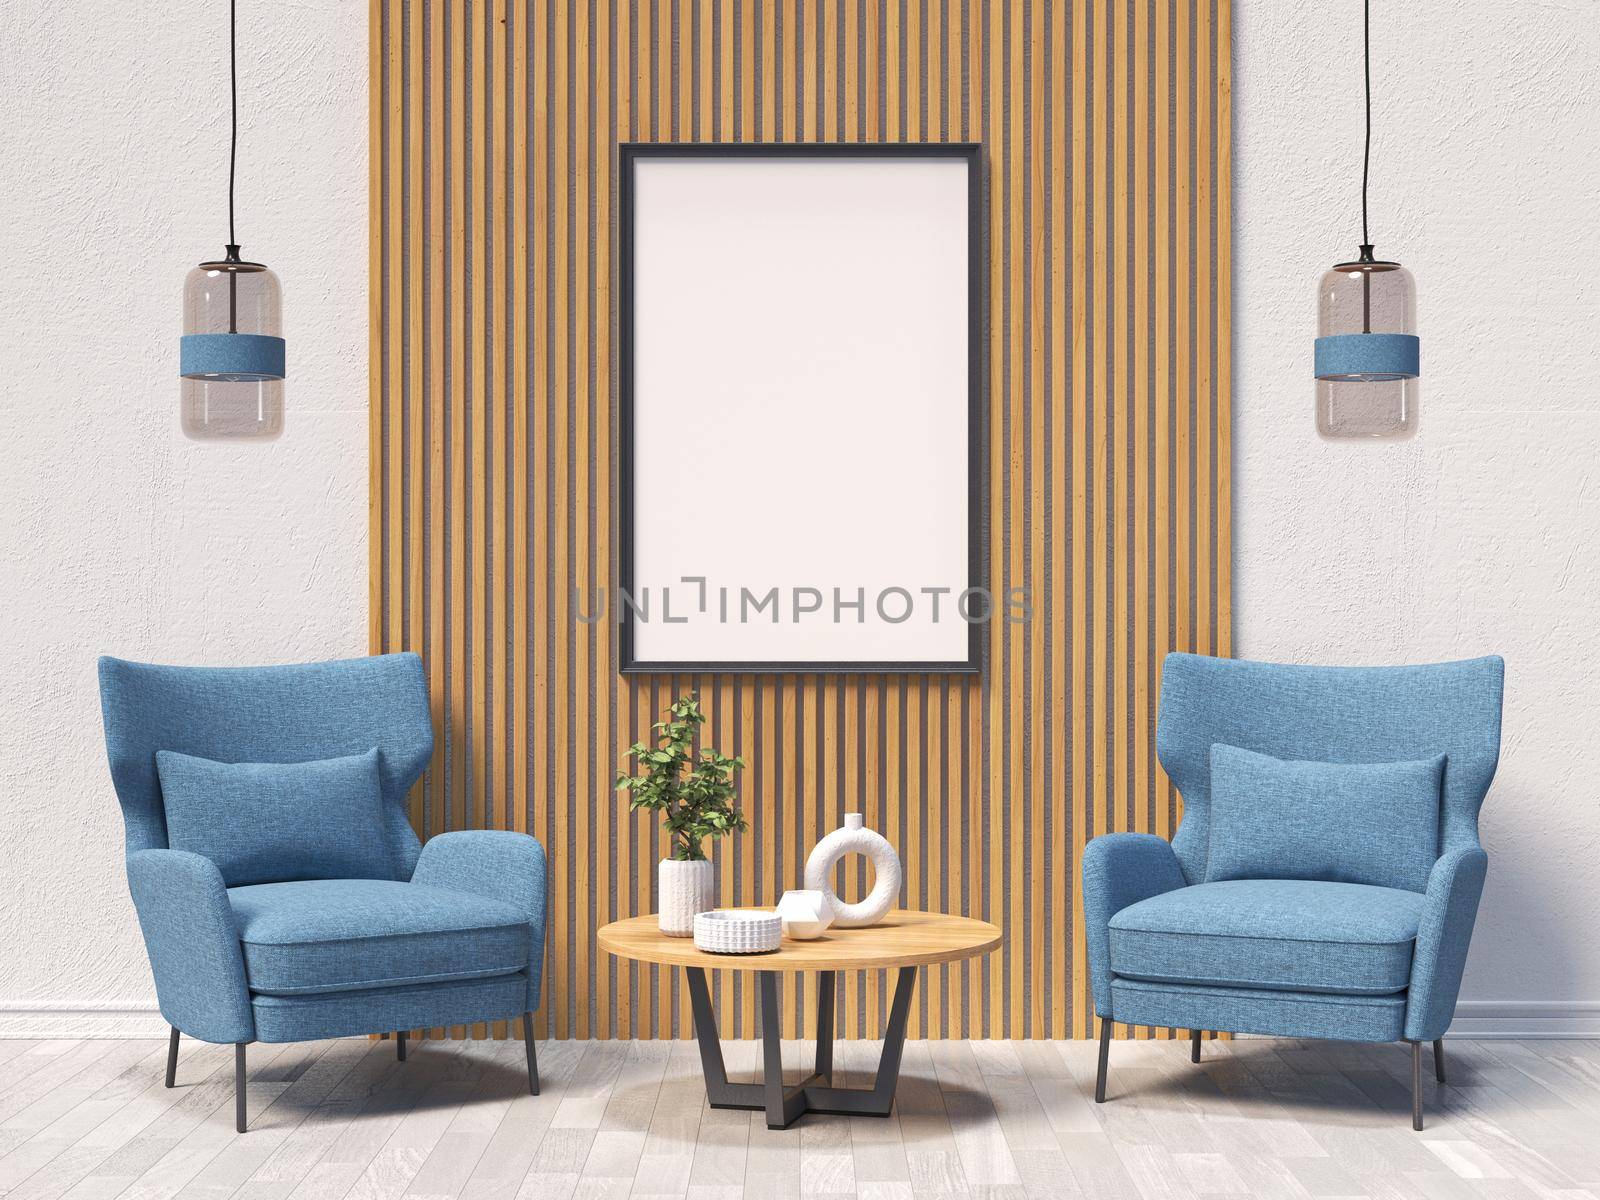 Mock up poster frames with blue armchairs and wooden wall panel  in modern interior background 3D render 3D illustration